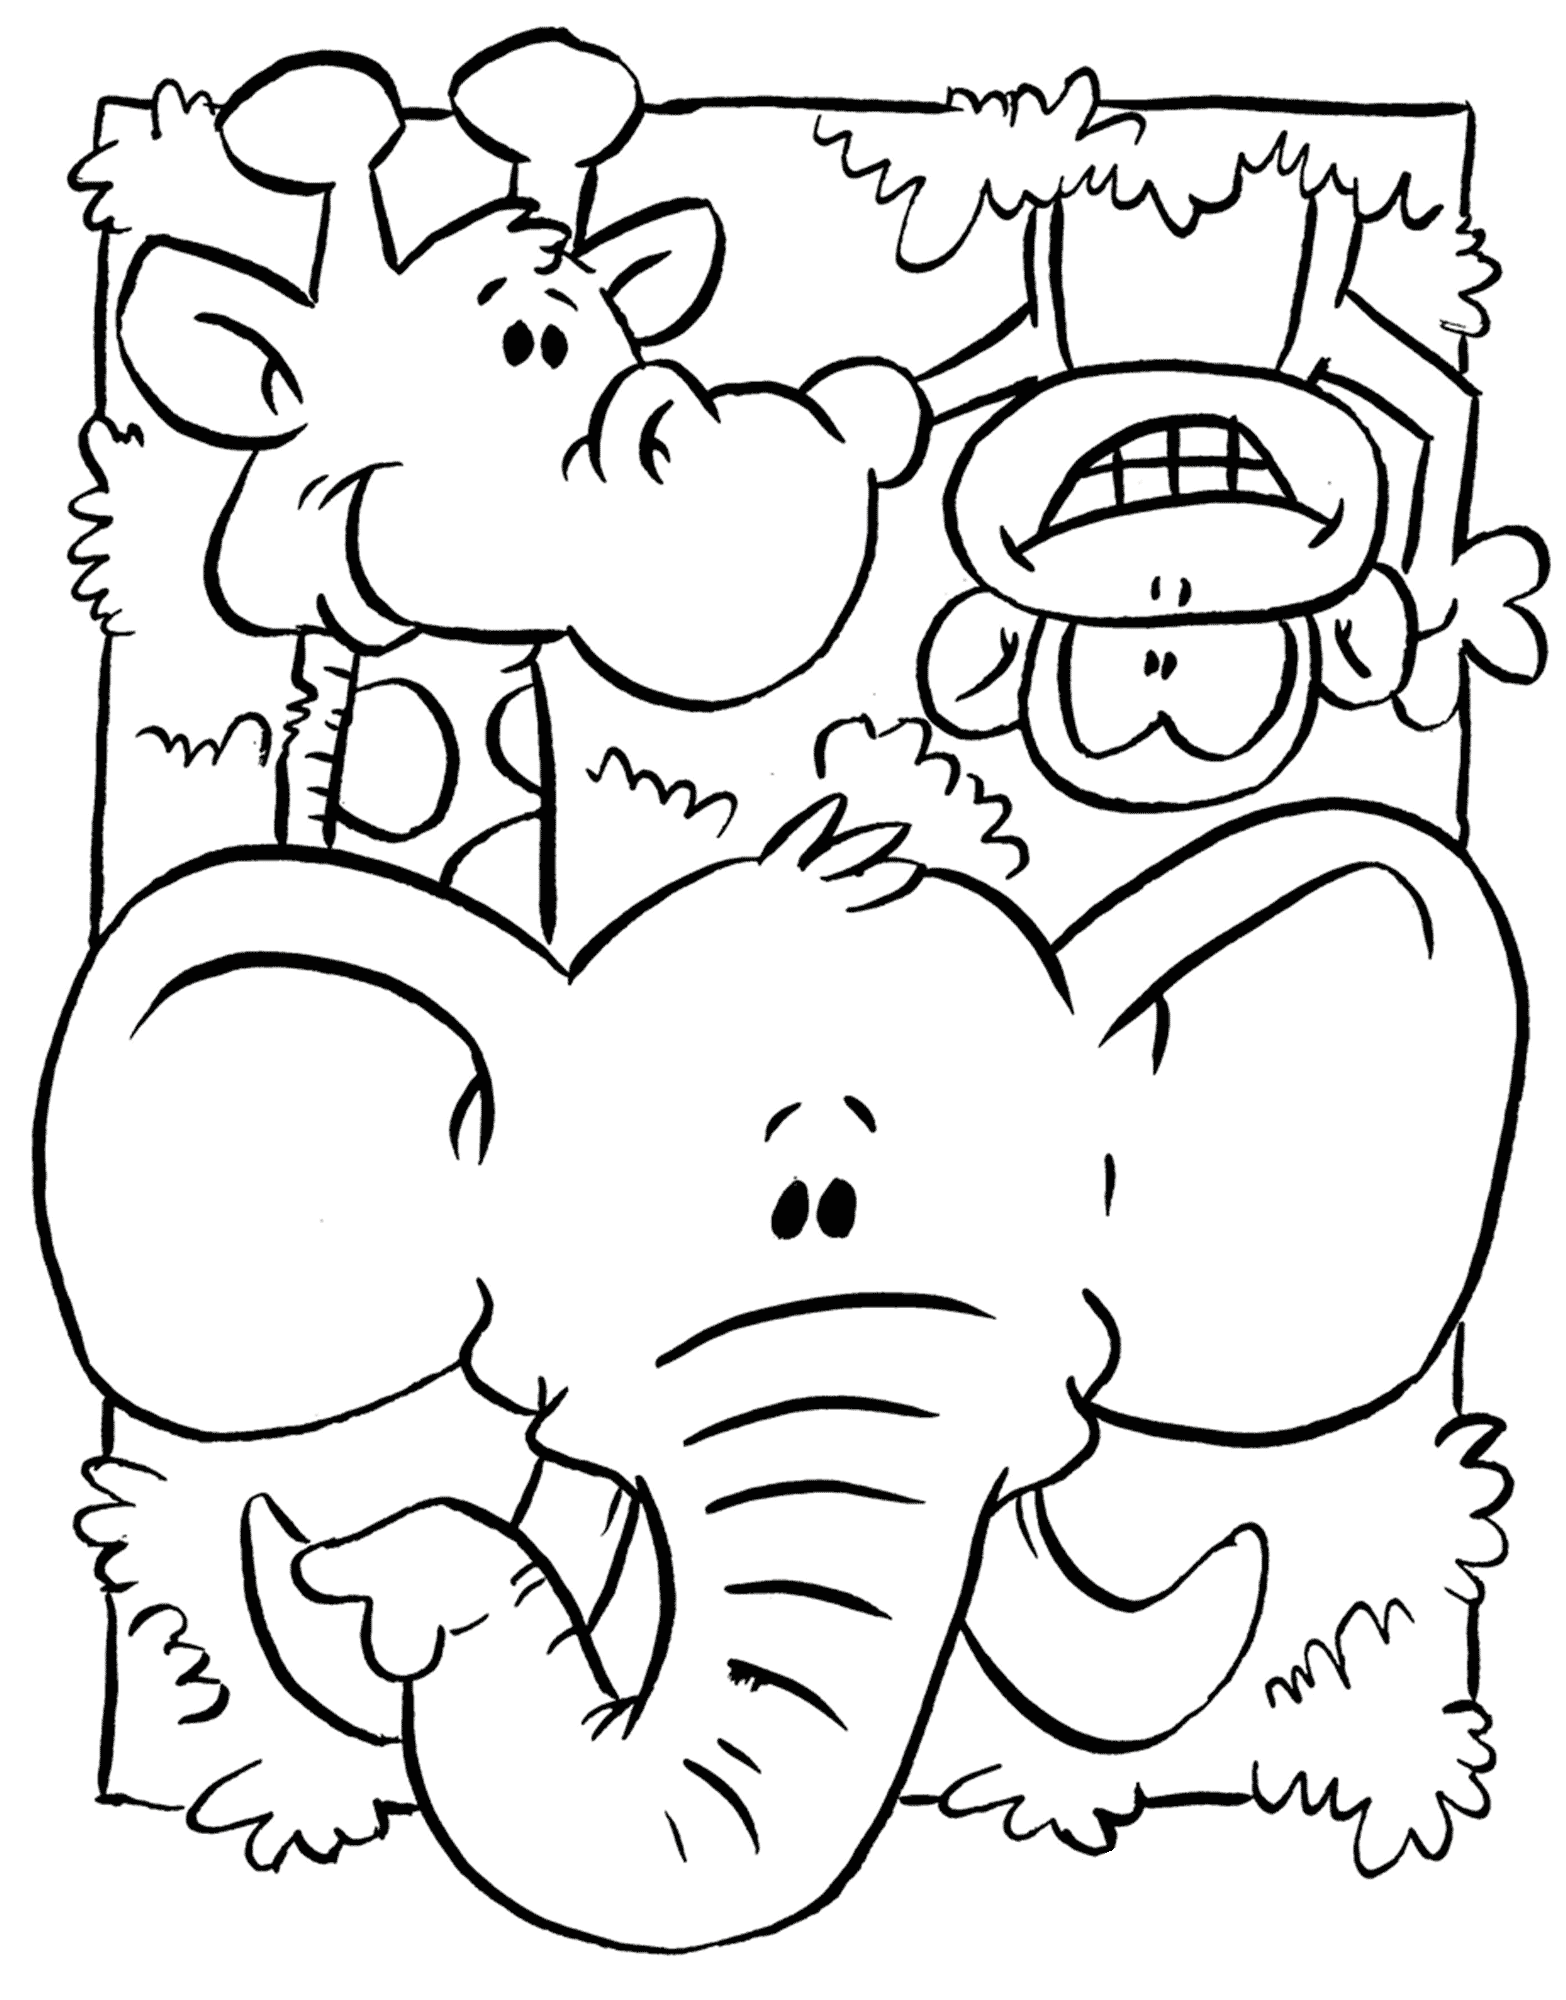 Wild Animal Coloring Pages Best Coloring Pages For Kids Zoo Animal Coloring Pages Jun